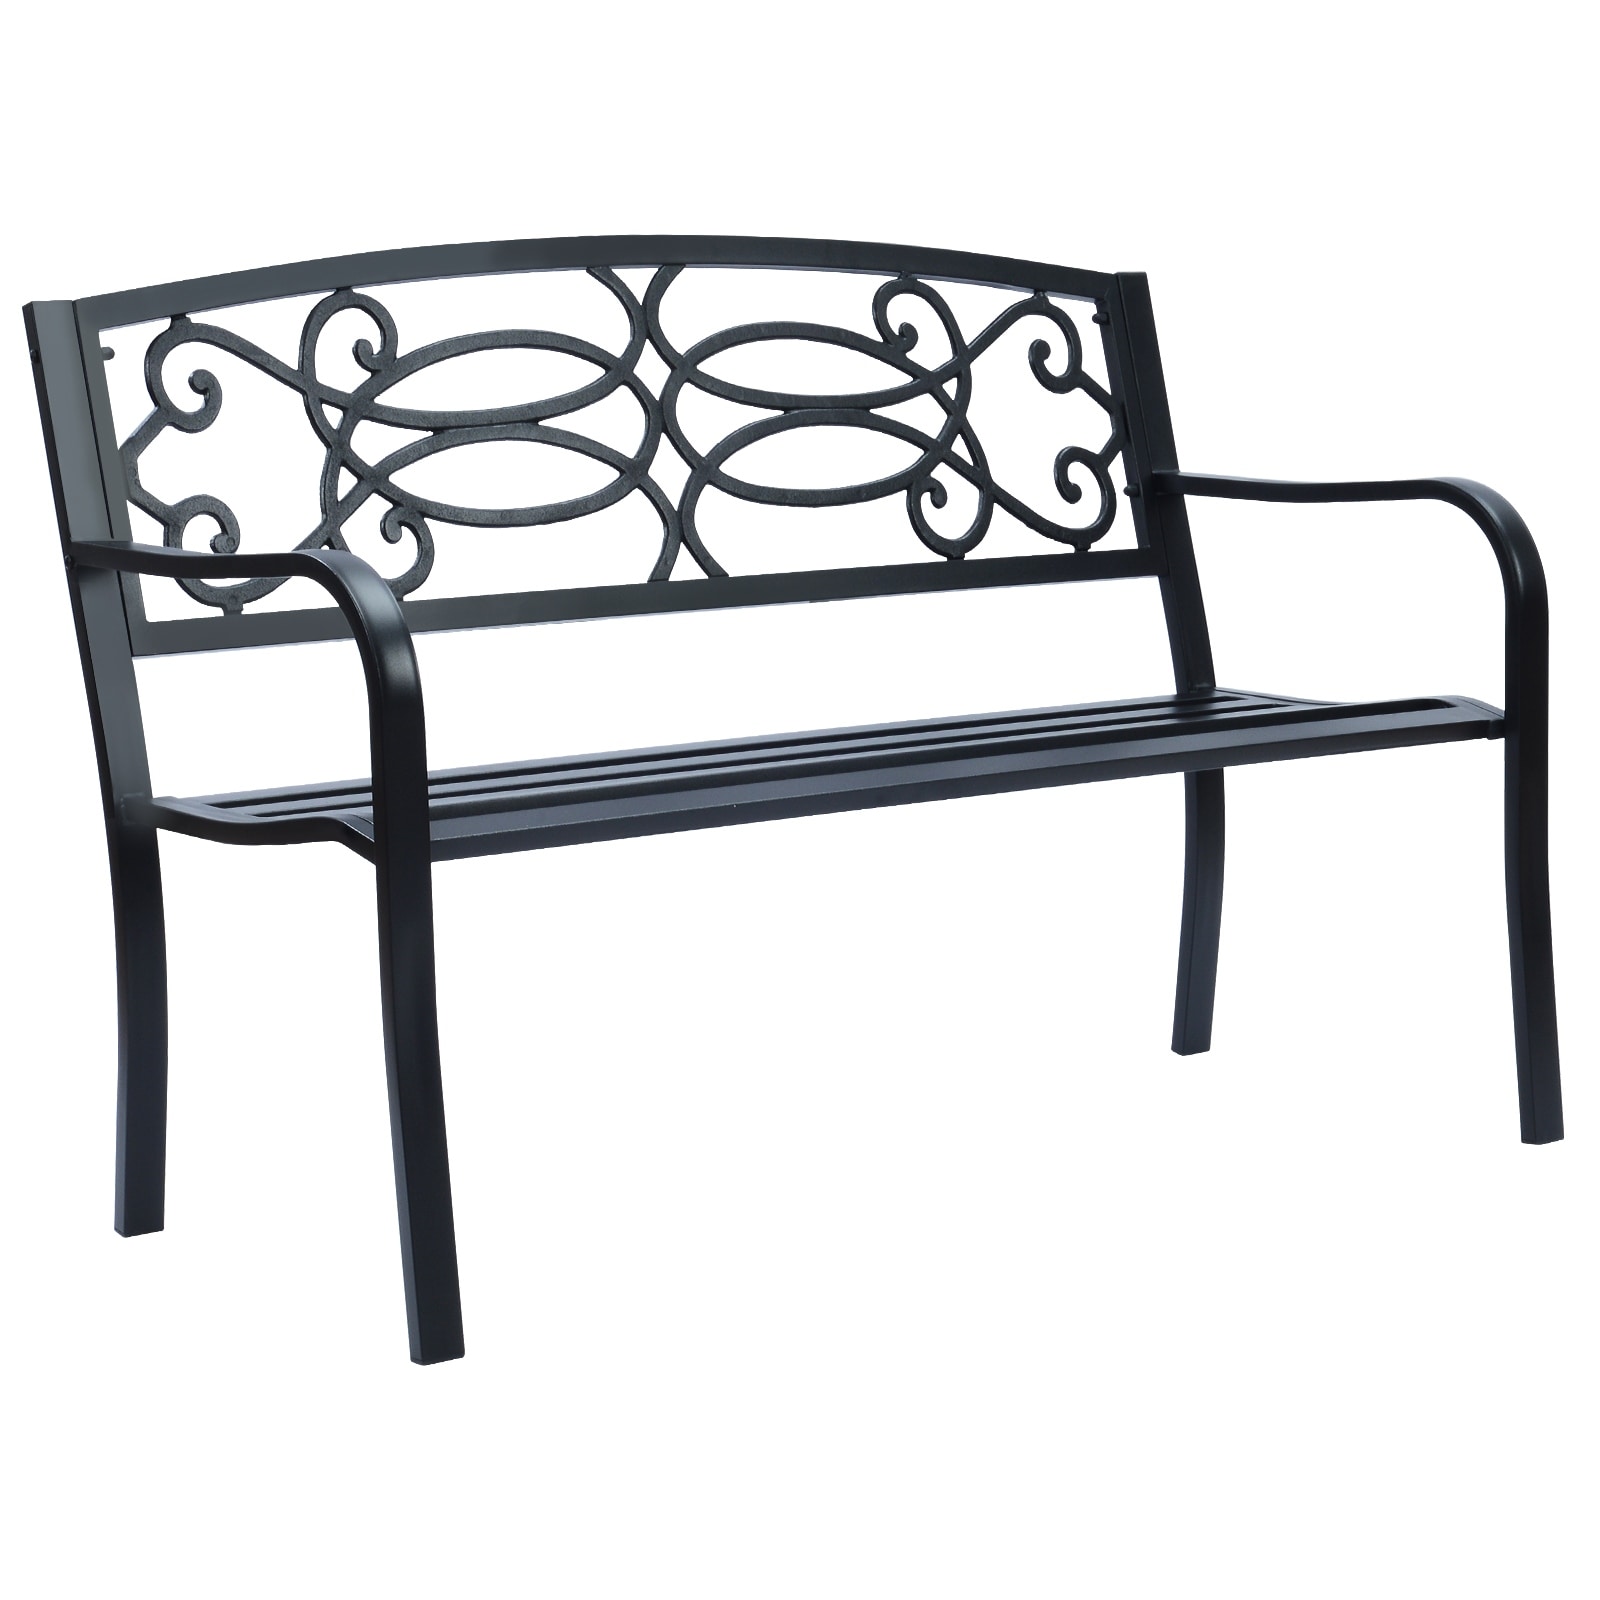 Black Bed Beyond & On Garden, Sale Bench, Outdoor Bath Porch, for Park N/A Deck Lawn, by Bench - in Patio Sun-Ray - - Marion 33564601 Metal -